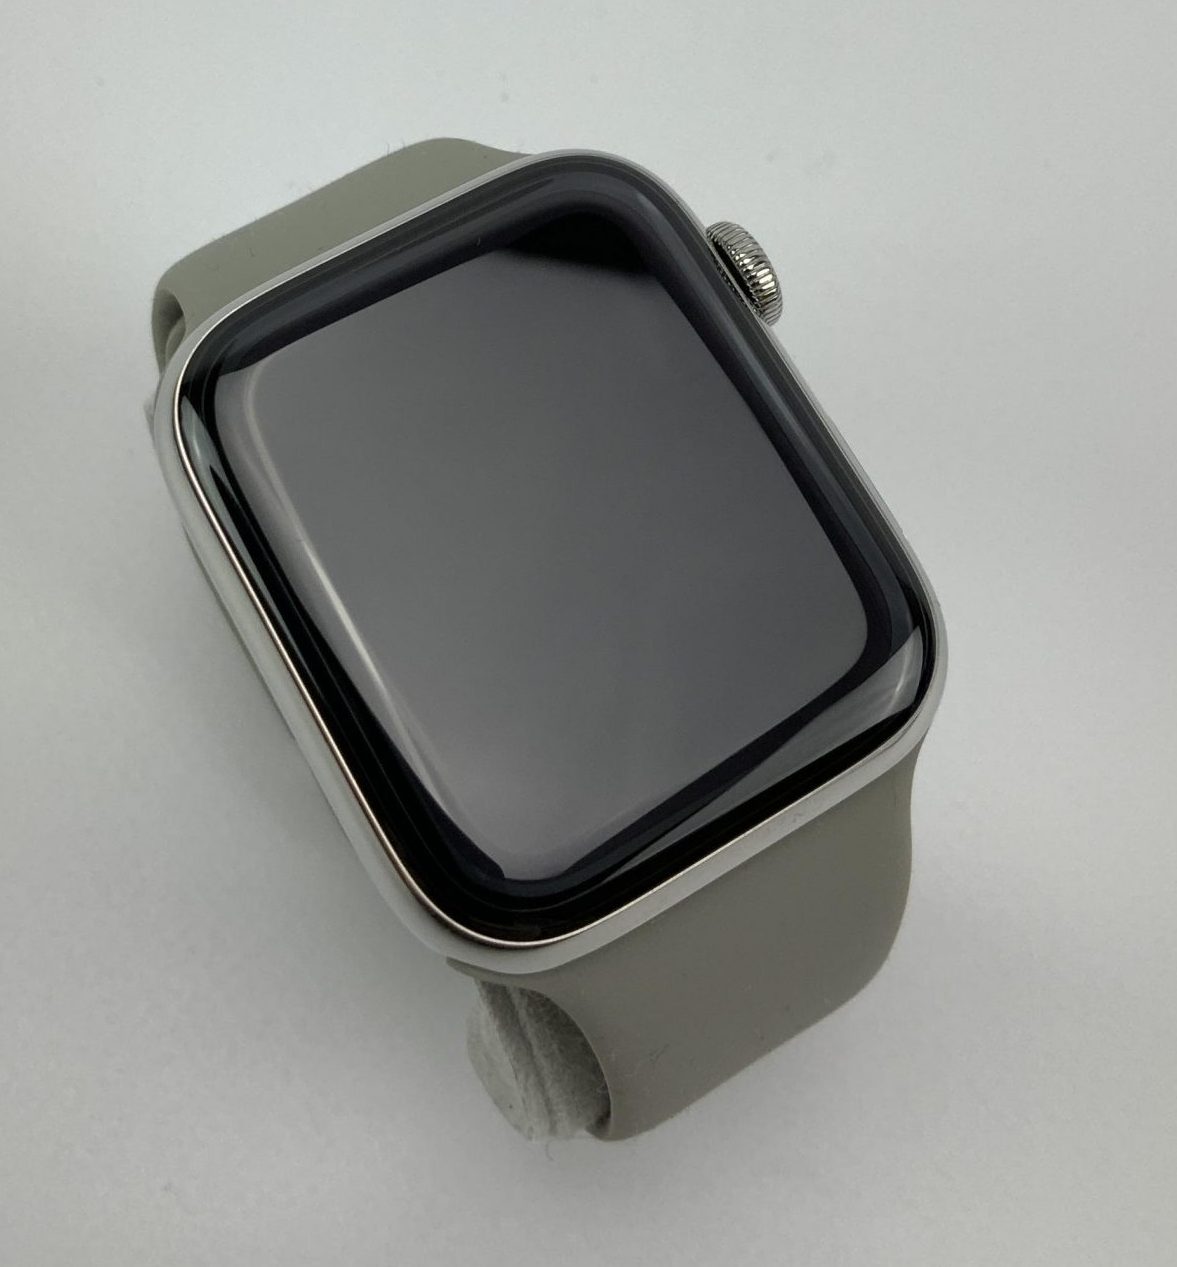 Watch Series 5 Steel Cellular (44mm), Silver, image 3